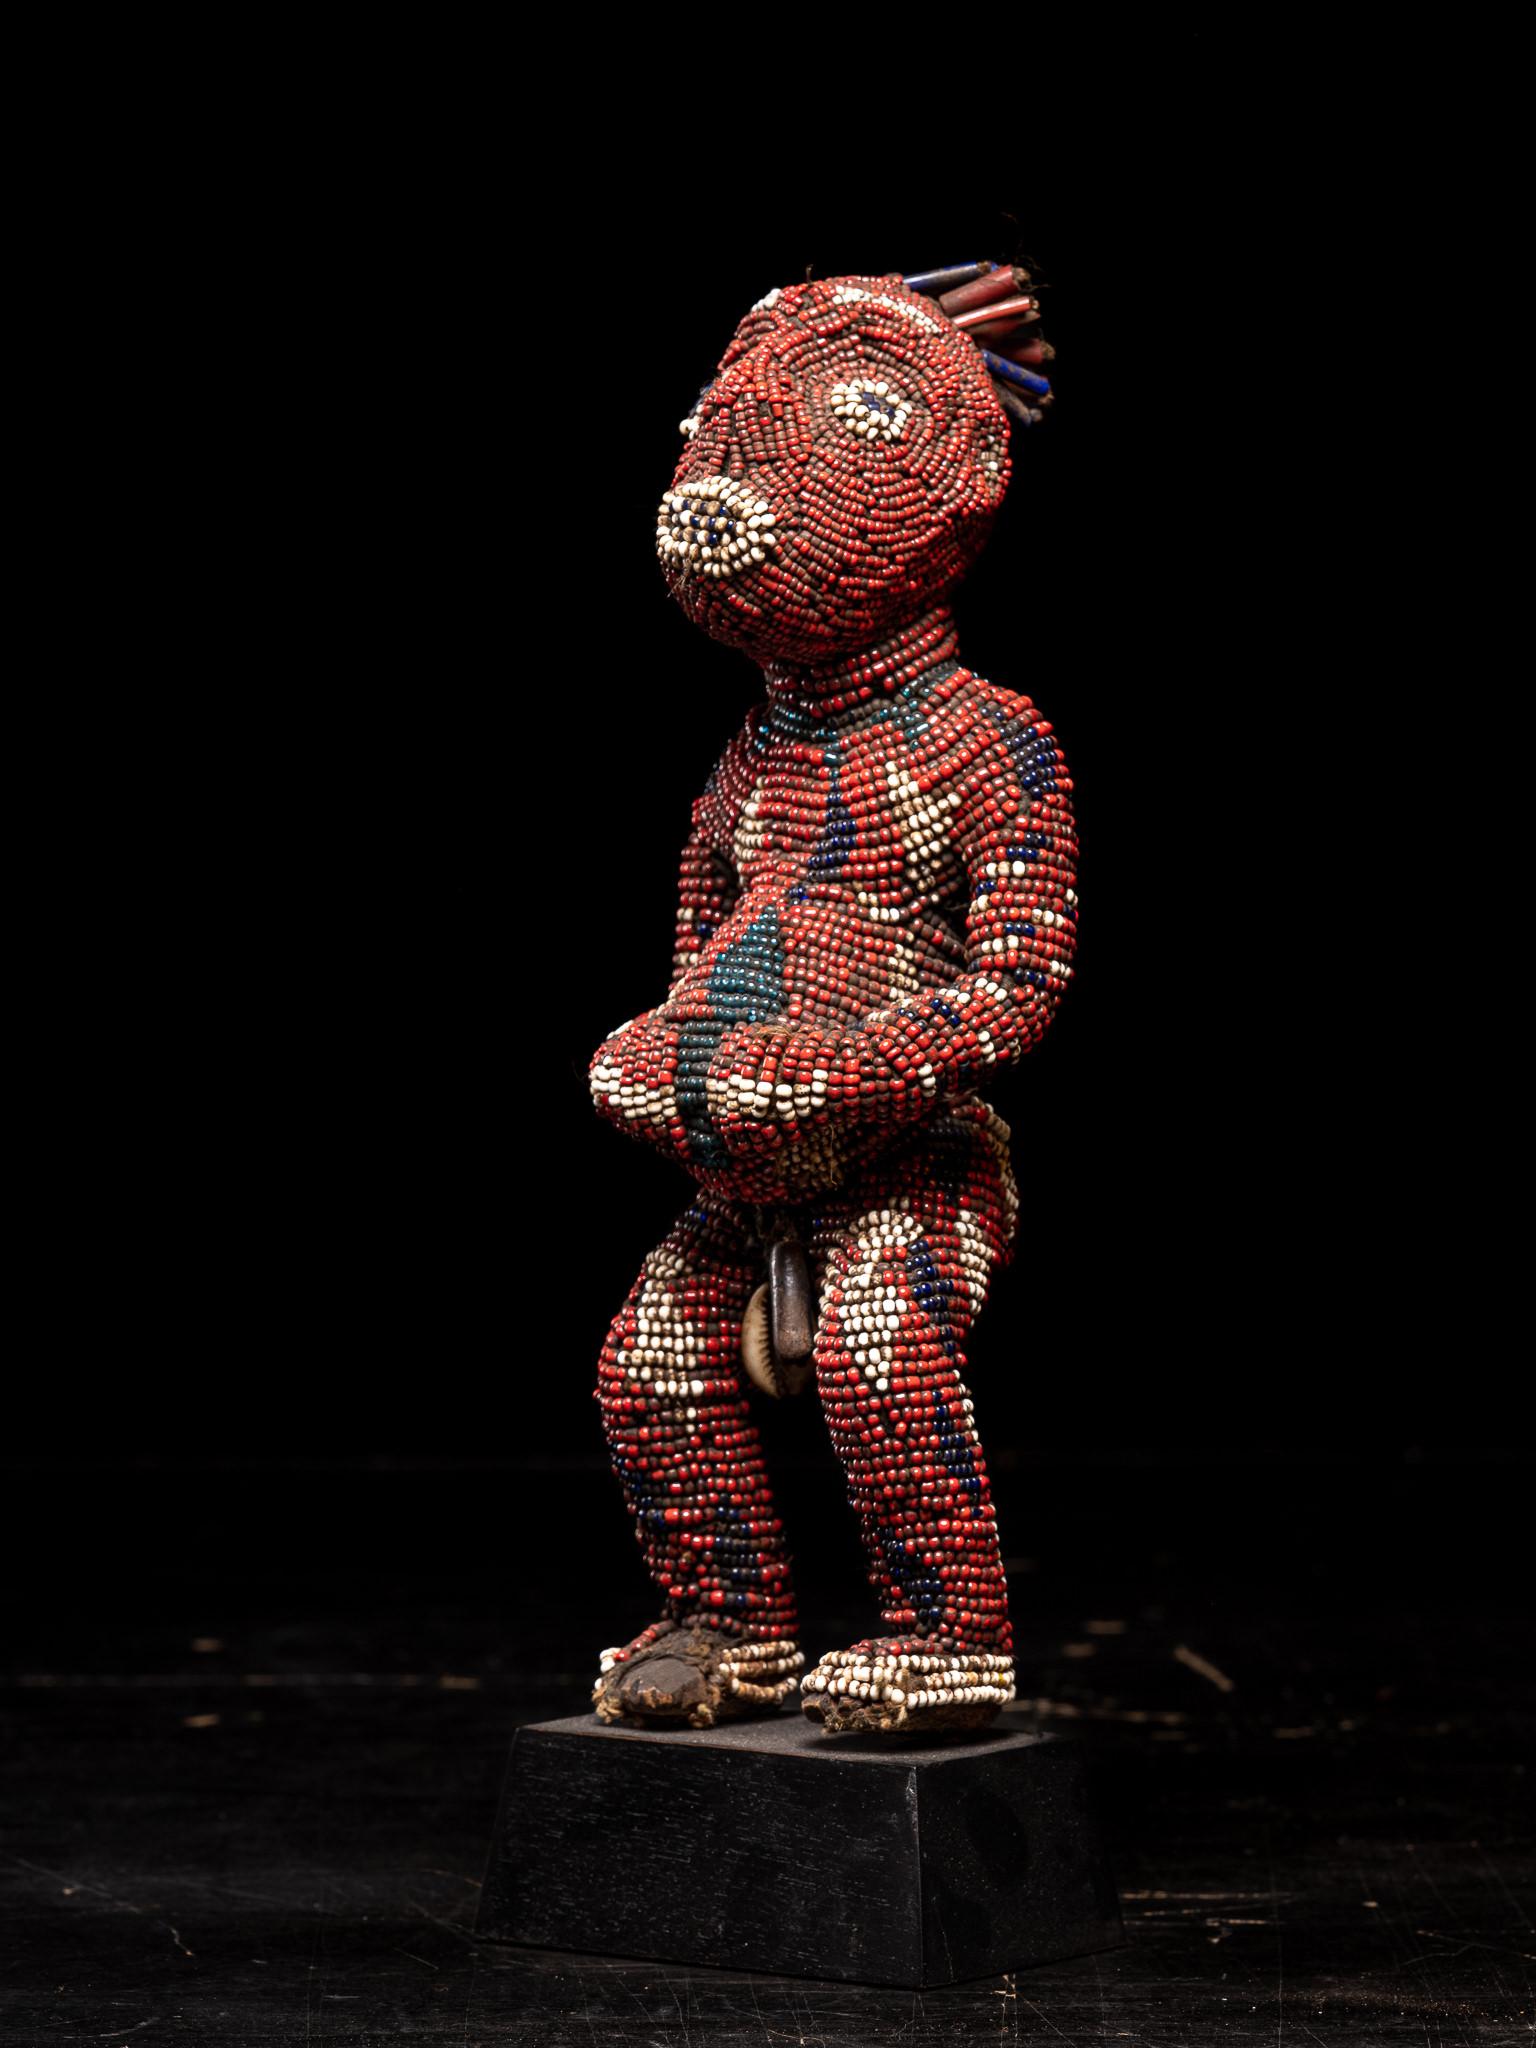 Bamum Decorative Wooden Ancestor Figure embroidered with European Glass Beads, Grasslands People , Cameroon
Private collection Brussels
These commemorative statuettes ,representing ancestors ,were initially carved in wood to be then covered with a